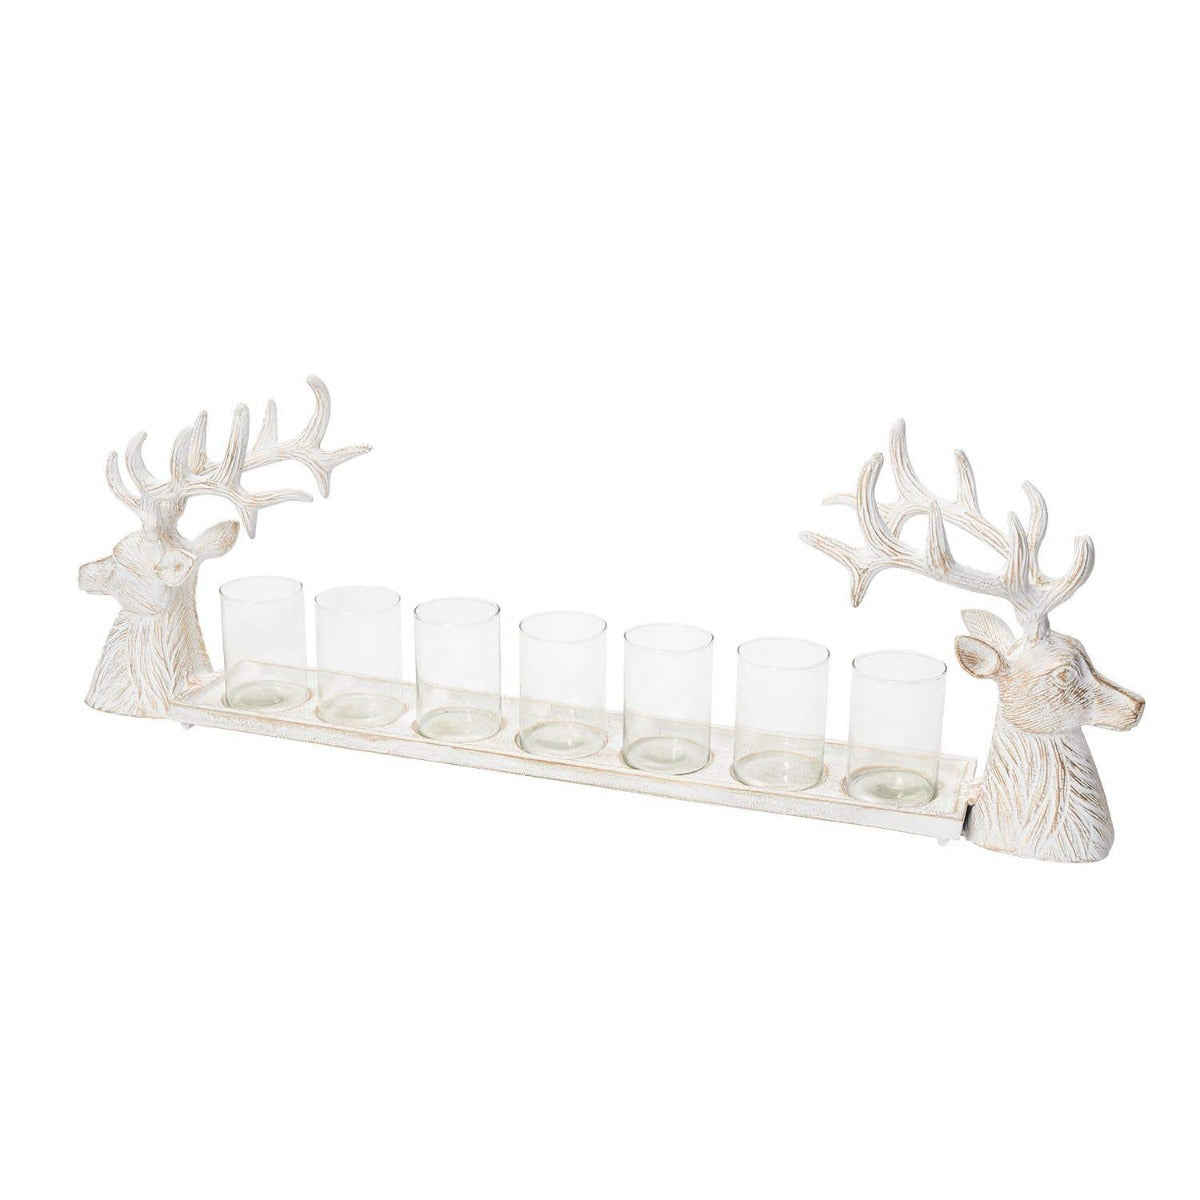 Stag Candle Tray